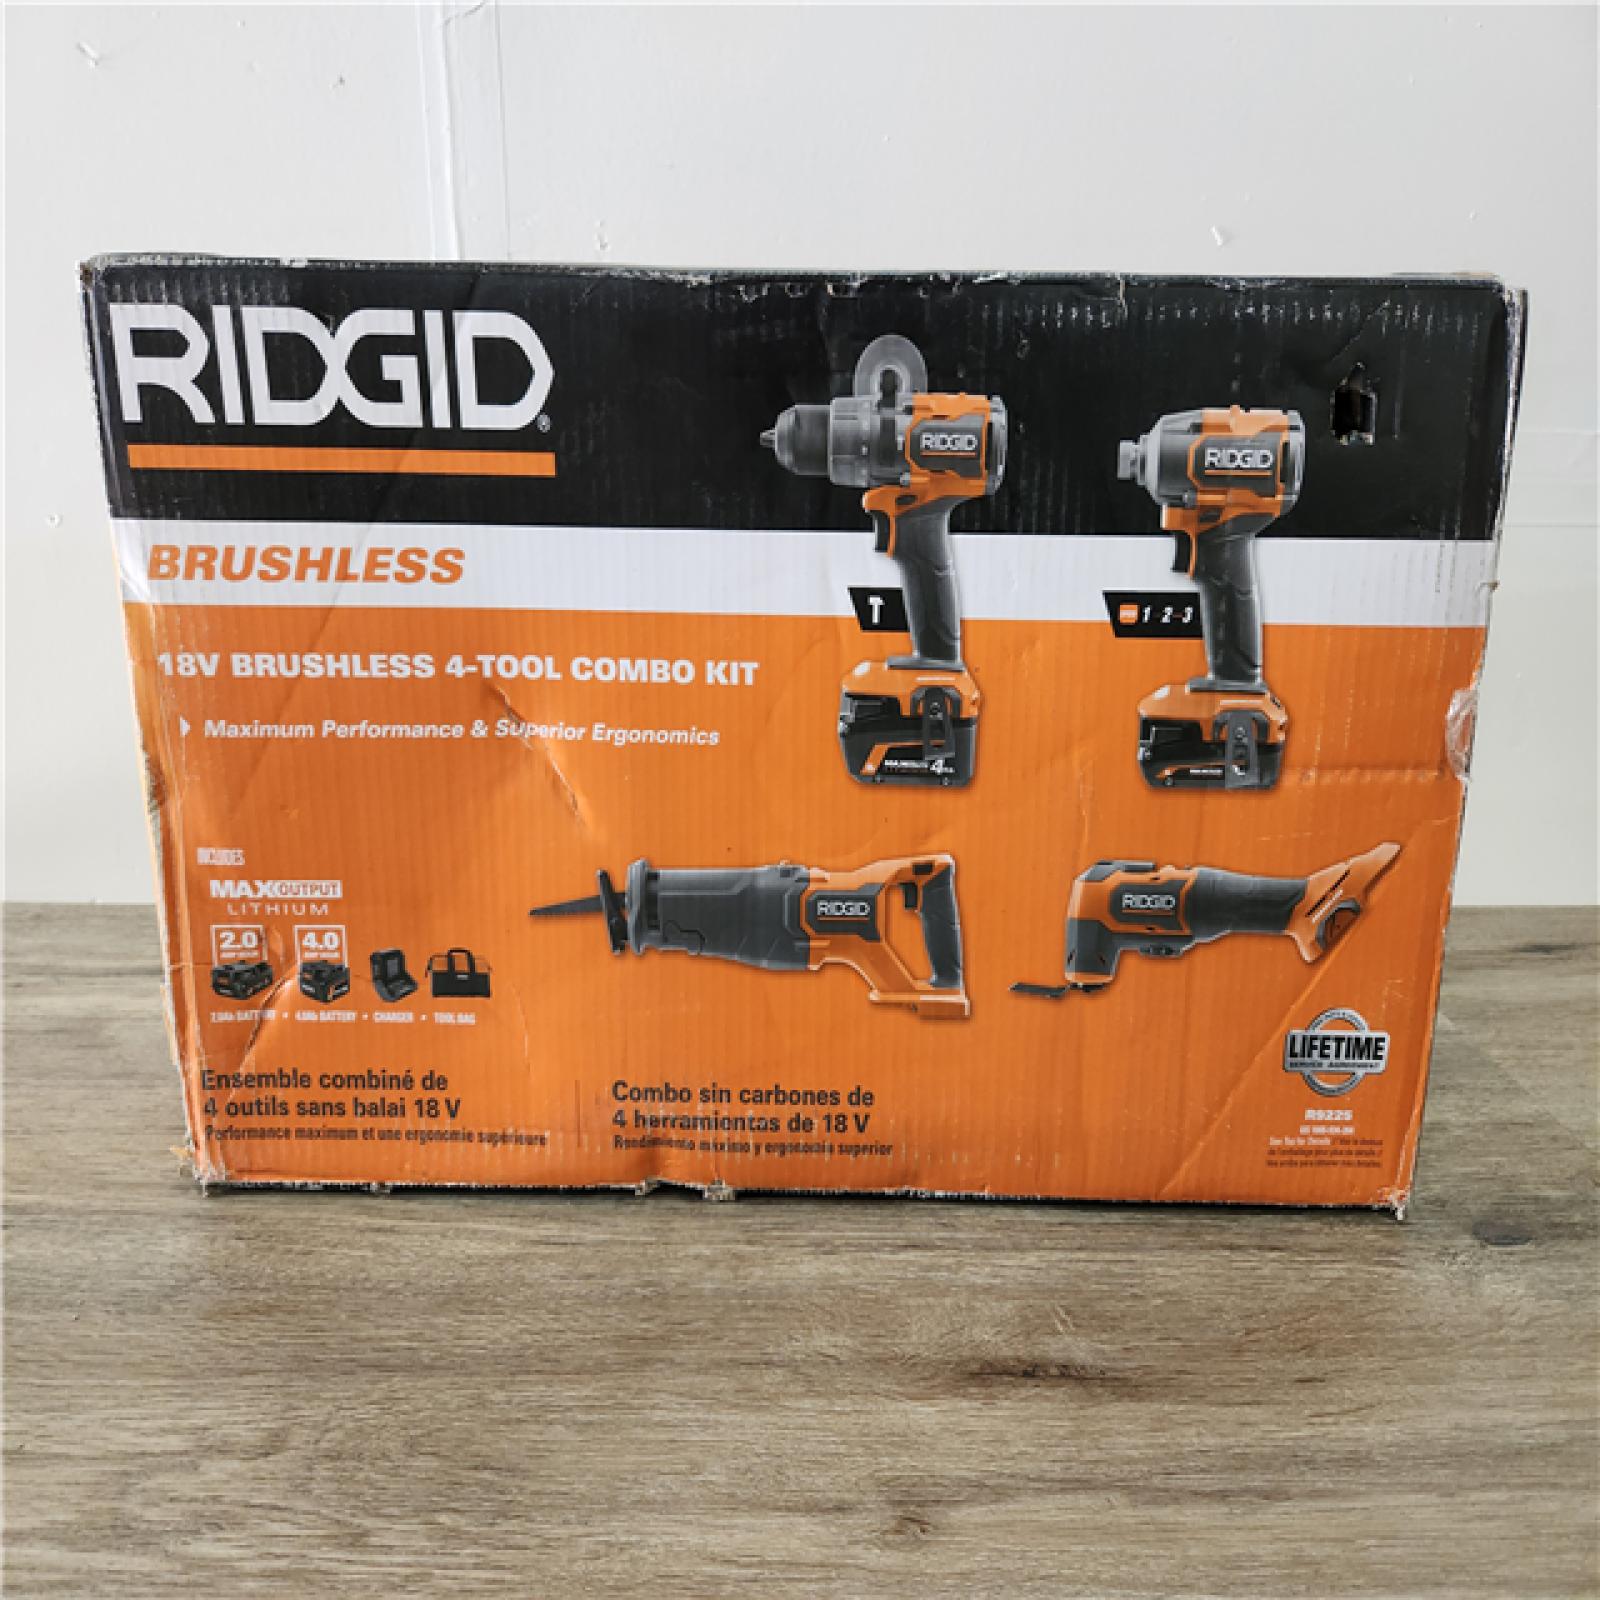 Phoenix Location NEW RIDGID 18V Brushless Cordless 4-Tool Combo Kit with (1) 4.0 Ah and (1) 2.0 Ah MAX Output Batteries, 18V Charger, and Tool Bag